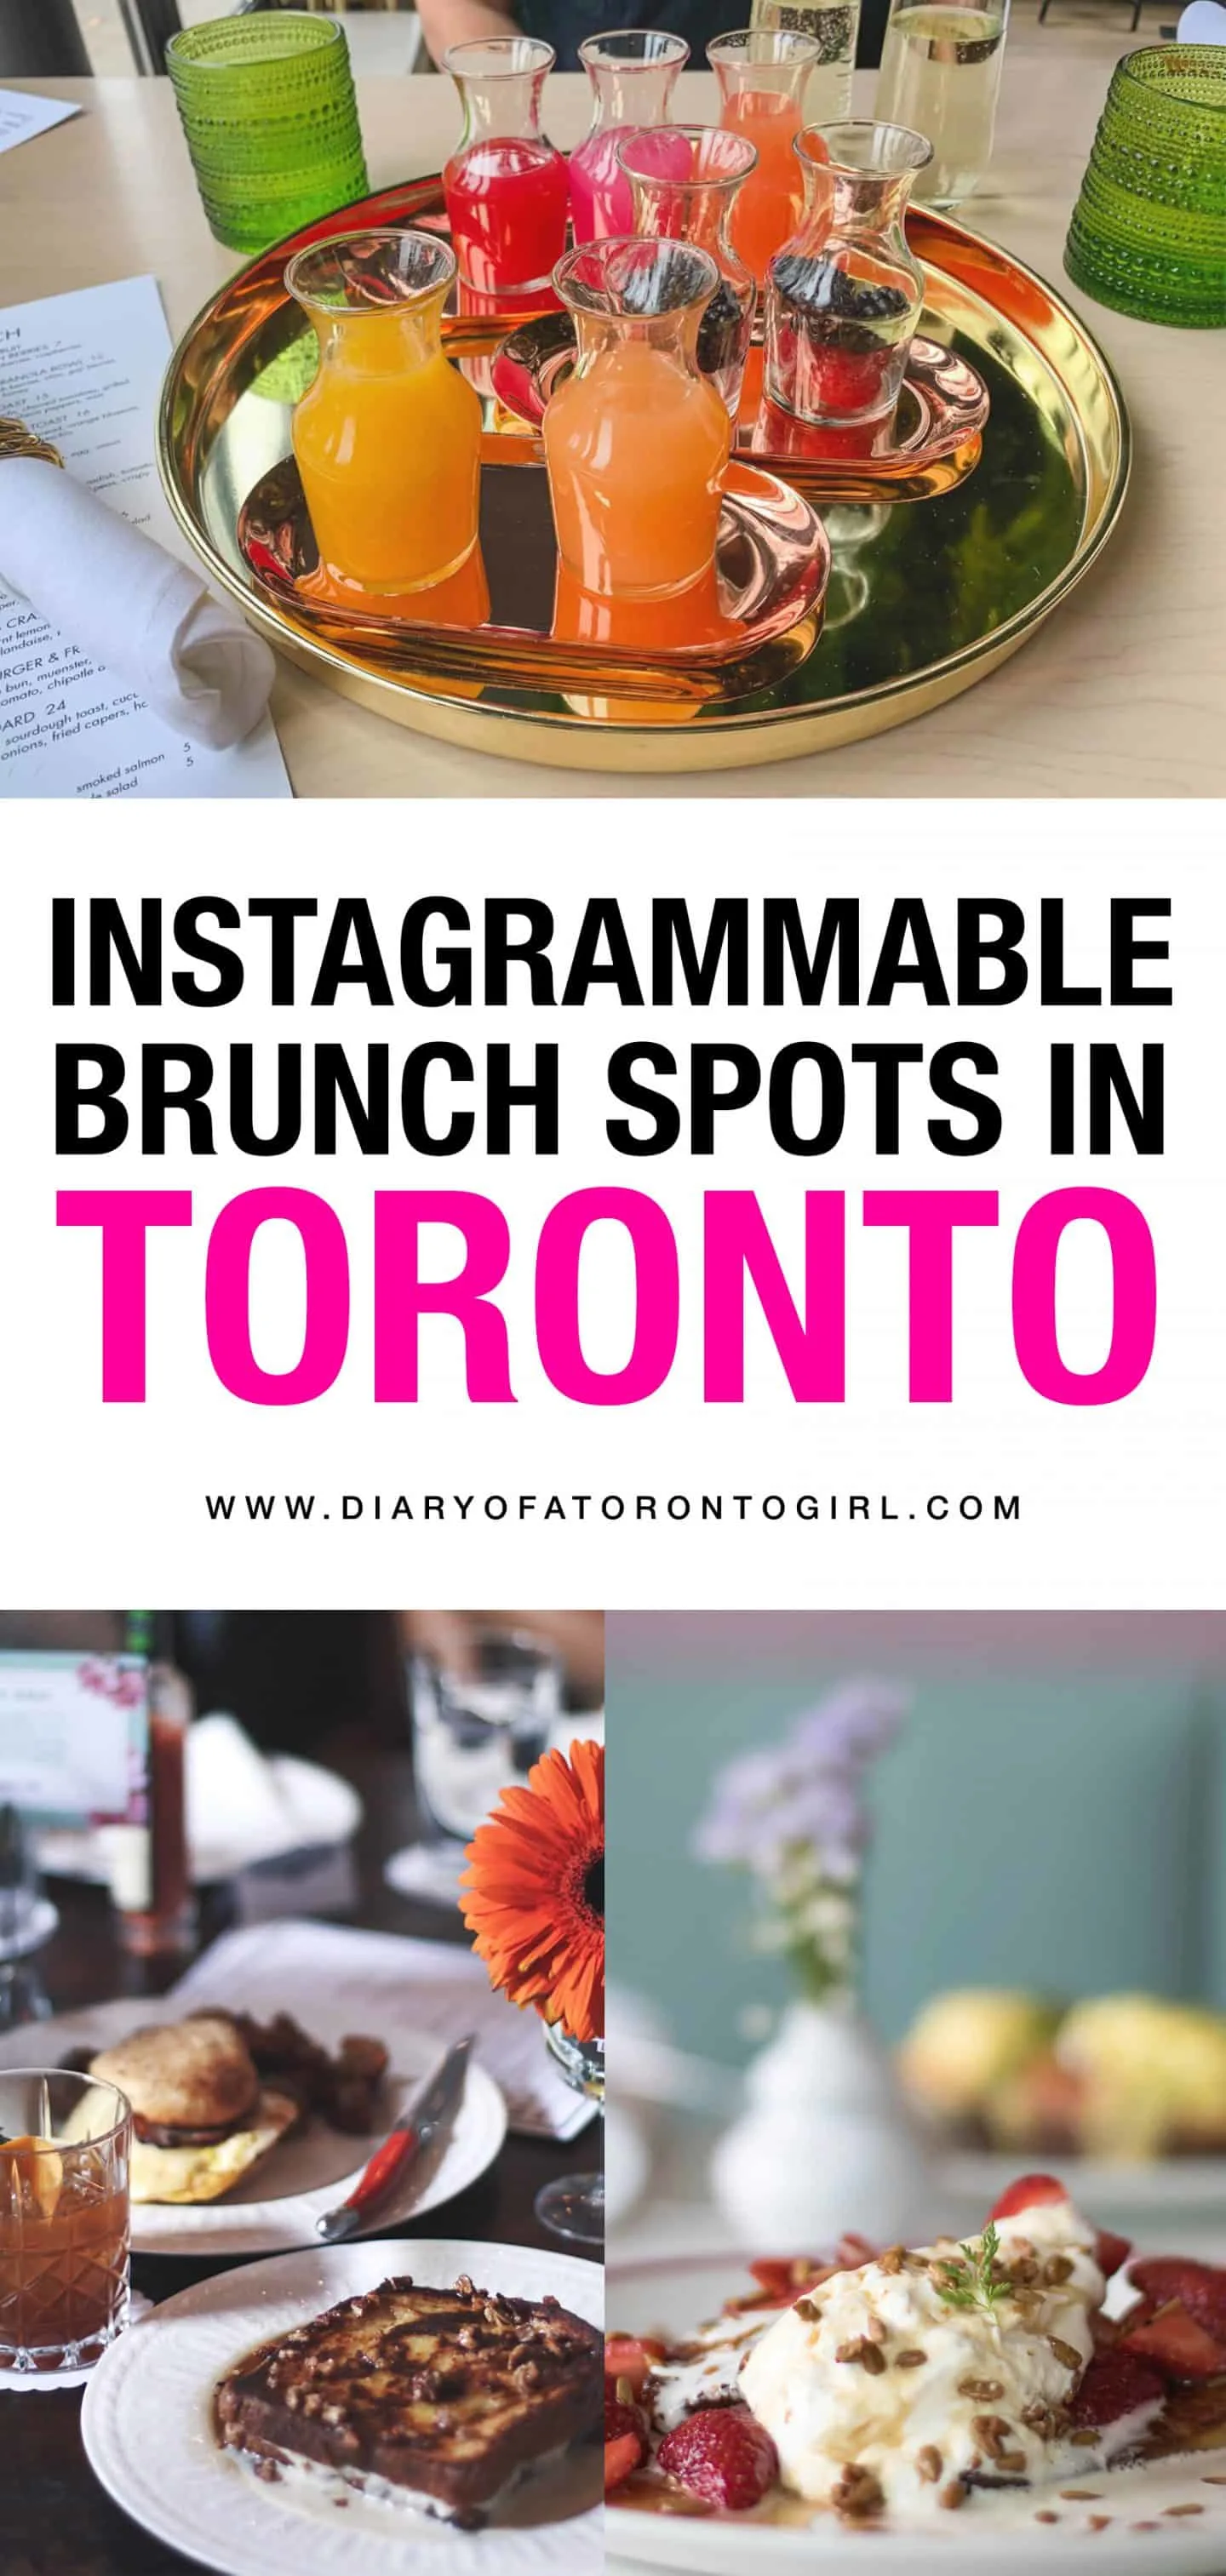 From healthy vegan chia seed pudding to hearty blueberry pancakes, you'll find all kinds of wonderful brunch spots in Toronto. Here are some of the best places to grab breakfast and brunch in the city!